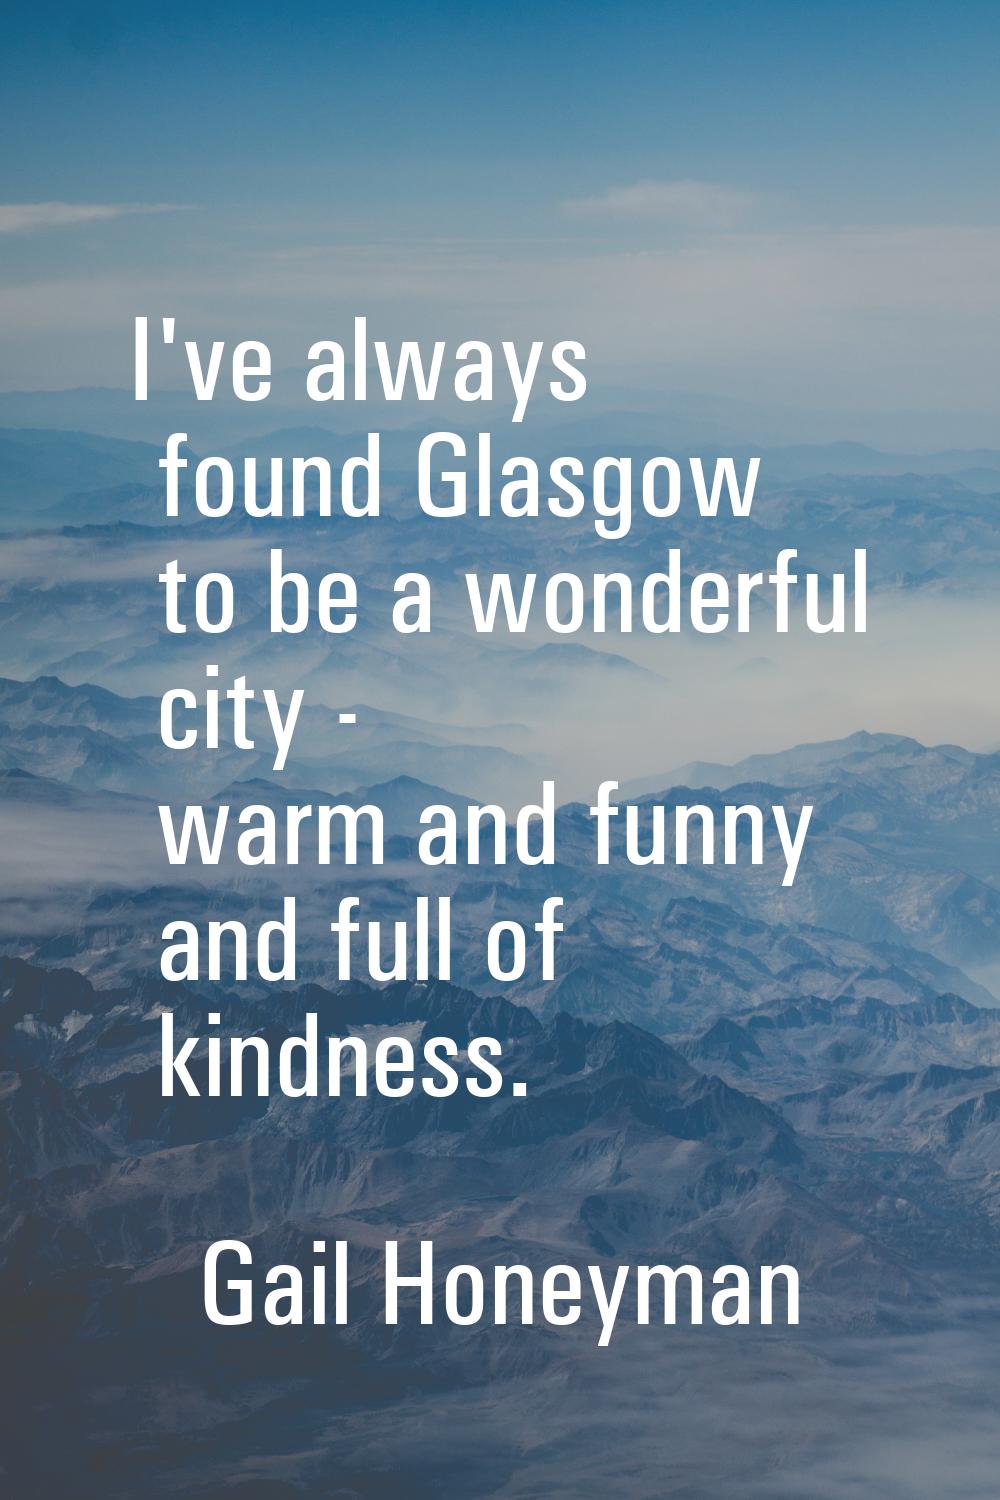 I've always found Glasgow to be a wonderful city - warm and funny and full of kindness.